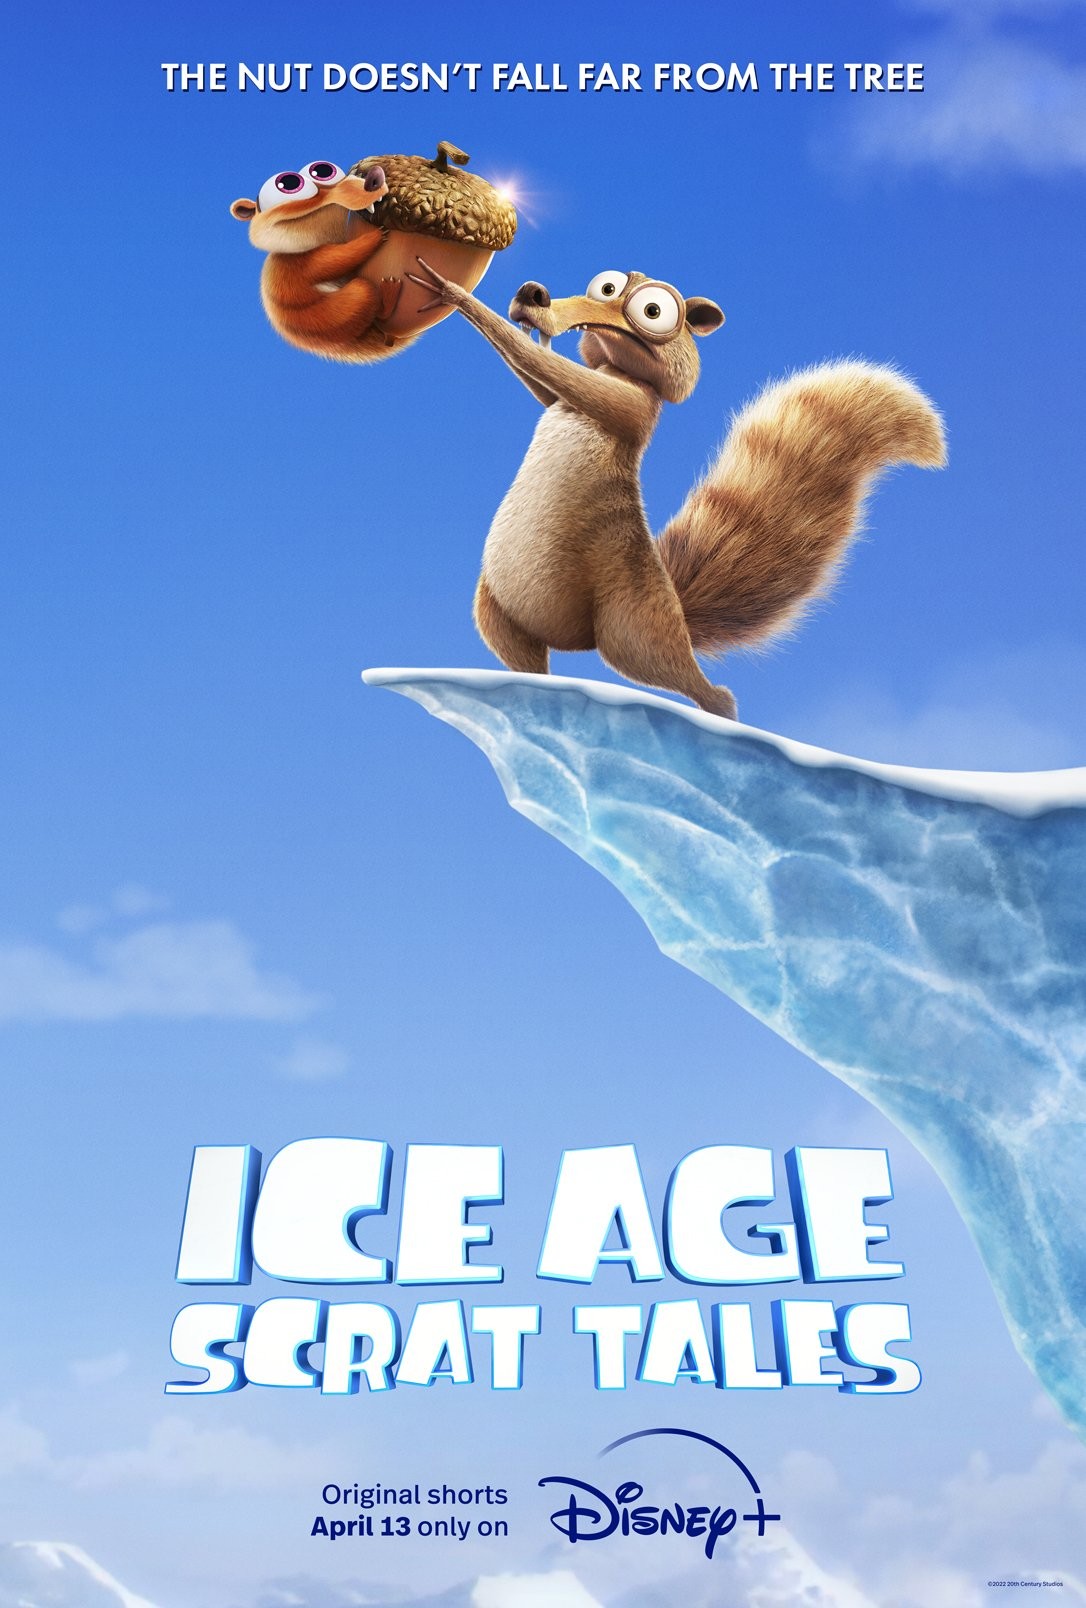  Ice Age: Scrat Tales | Promotional Poster